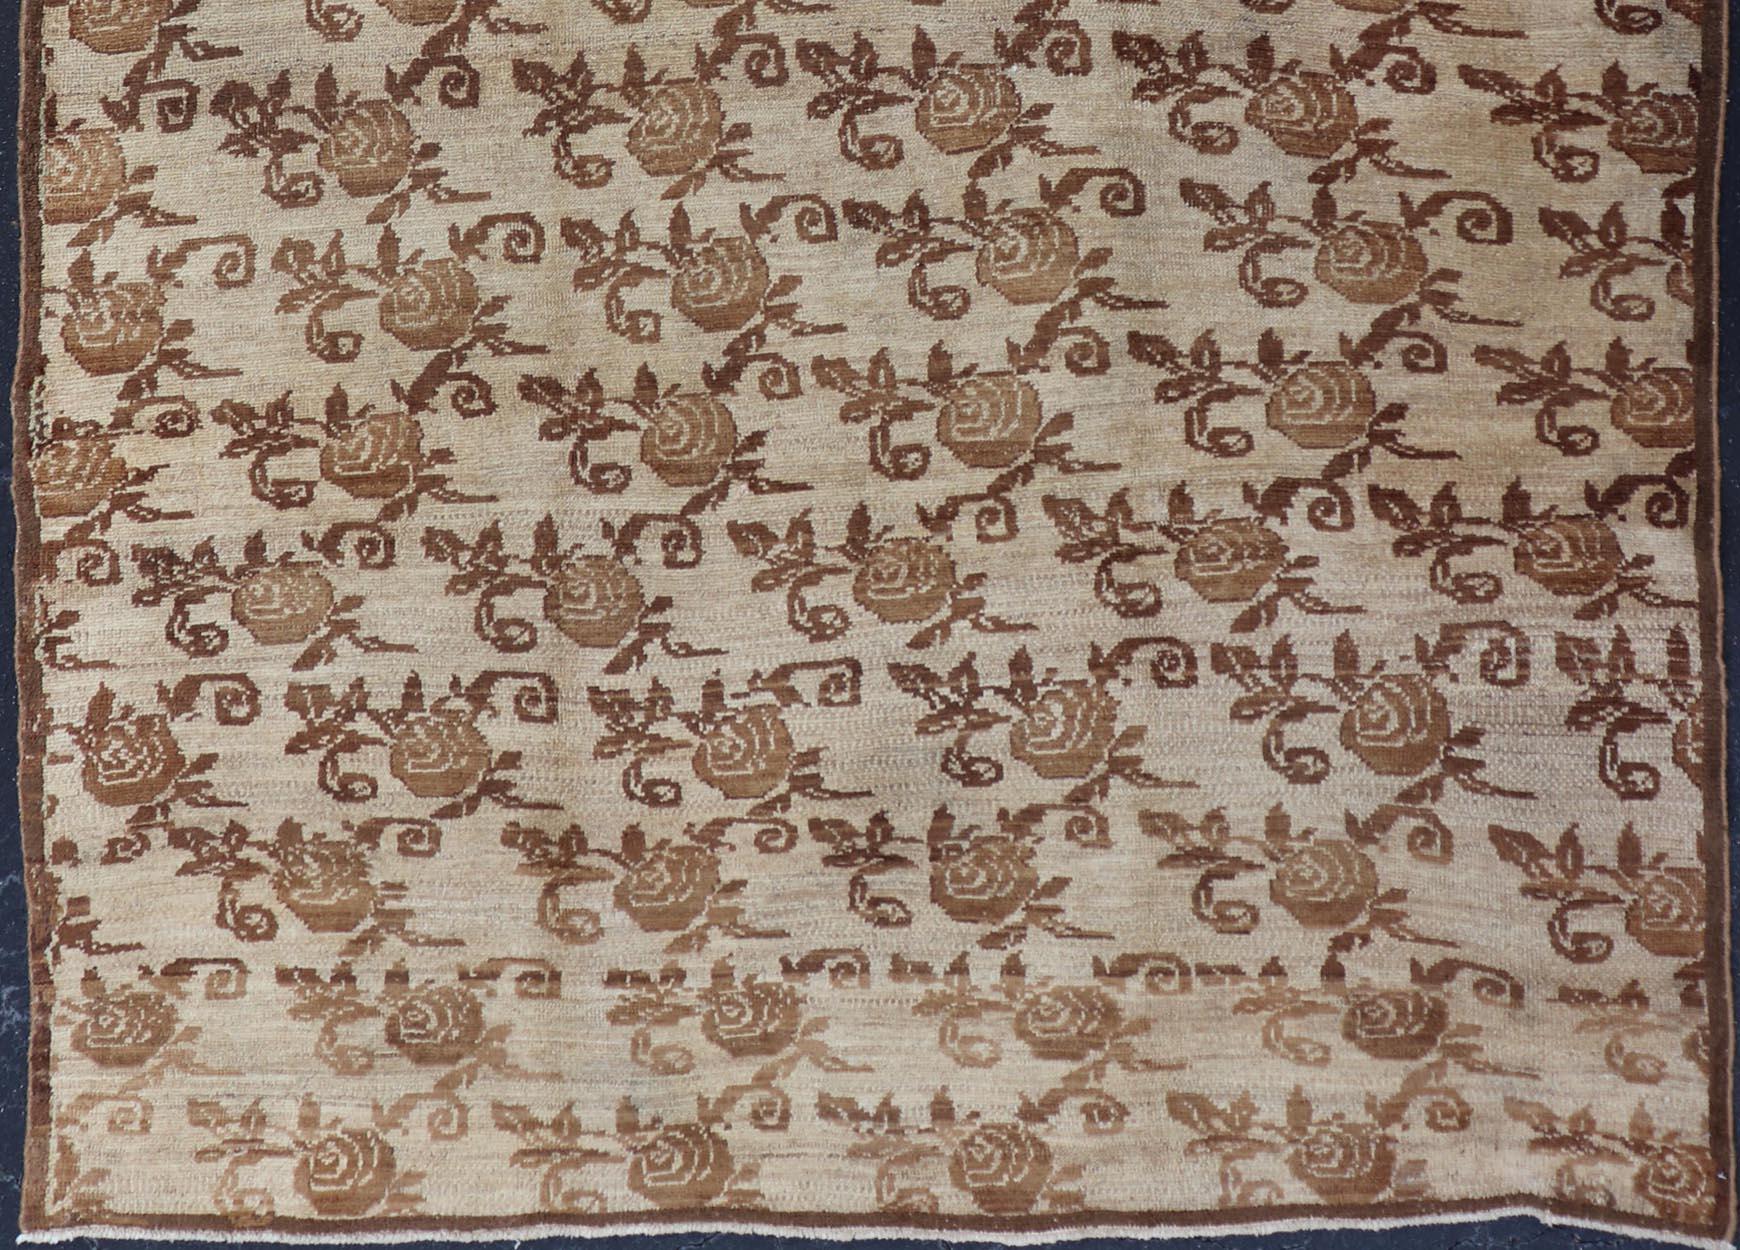 Unique Antique Turkish Konya Rug with All-Over Floral Pattern in Taupe and Brown For Sale 3